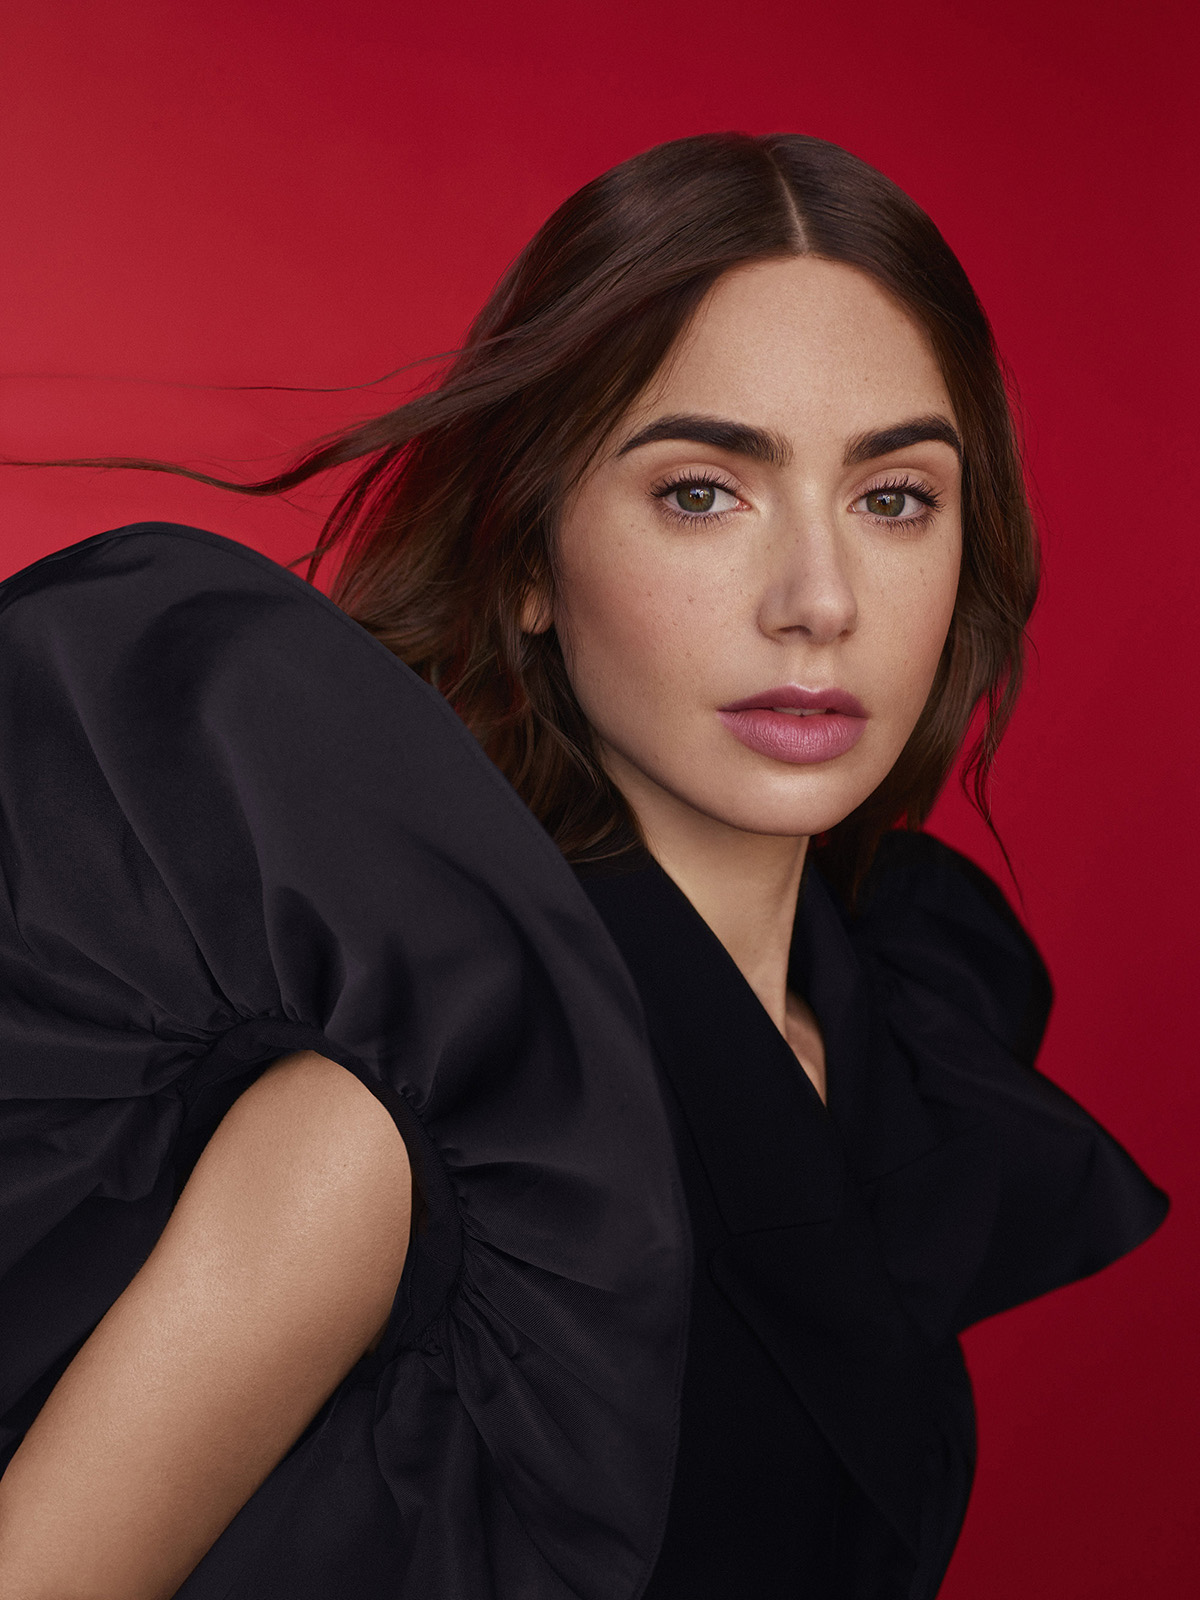 Lily Collins covers El País Semanal December 26th, 2021 by Thomas Whiteside